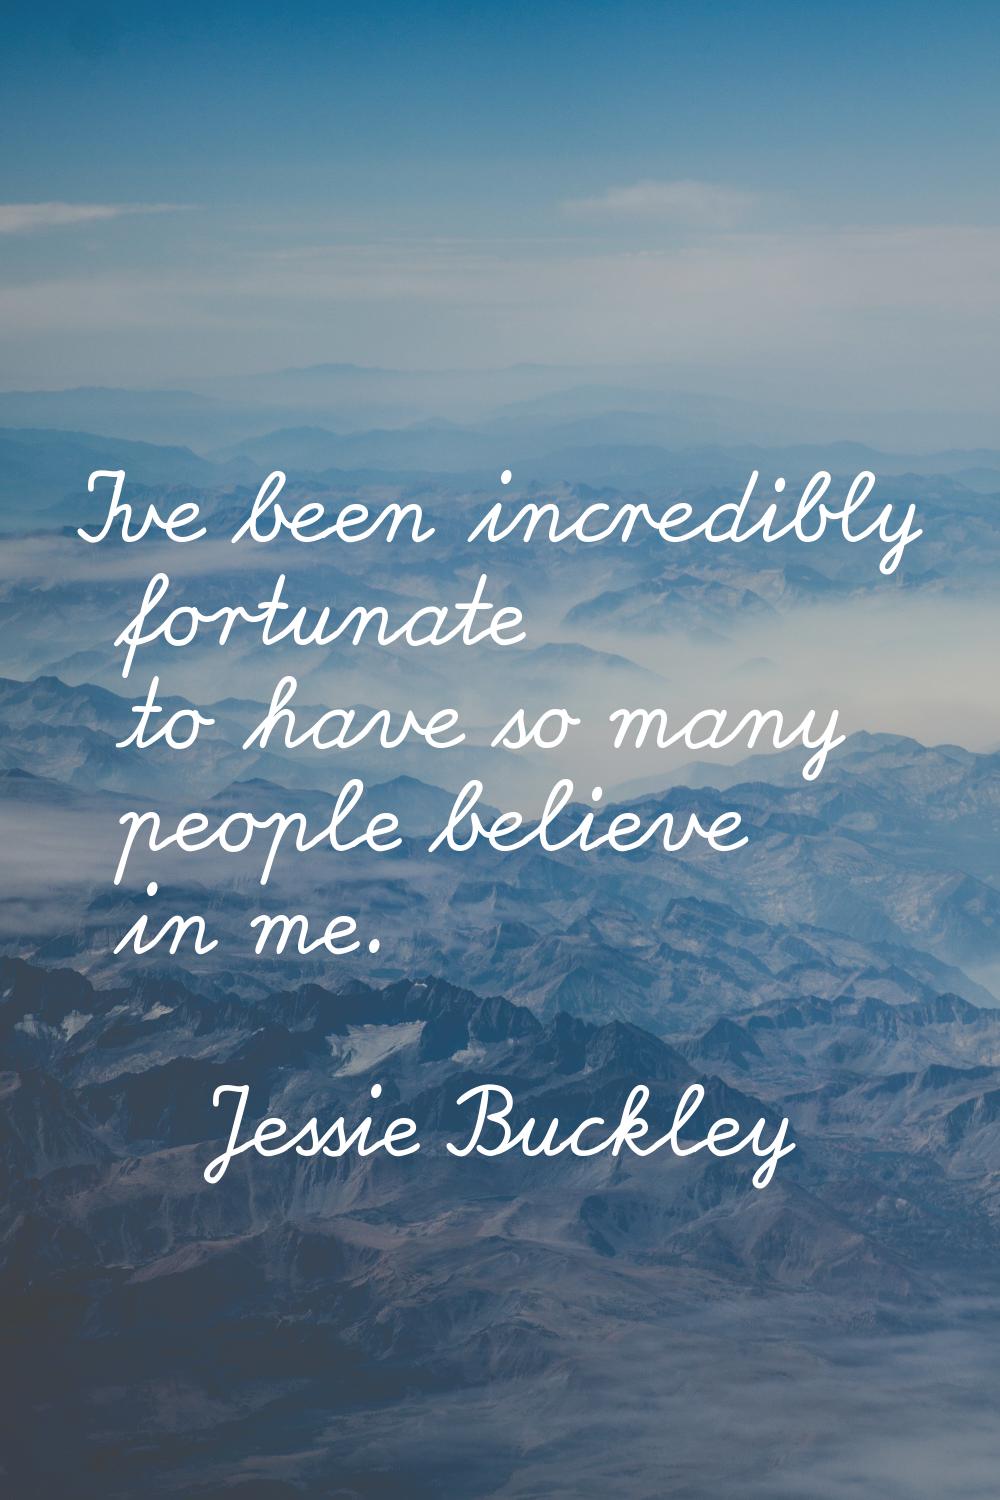 I've been incredibly fortunate to have so many people believe in me.